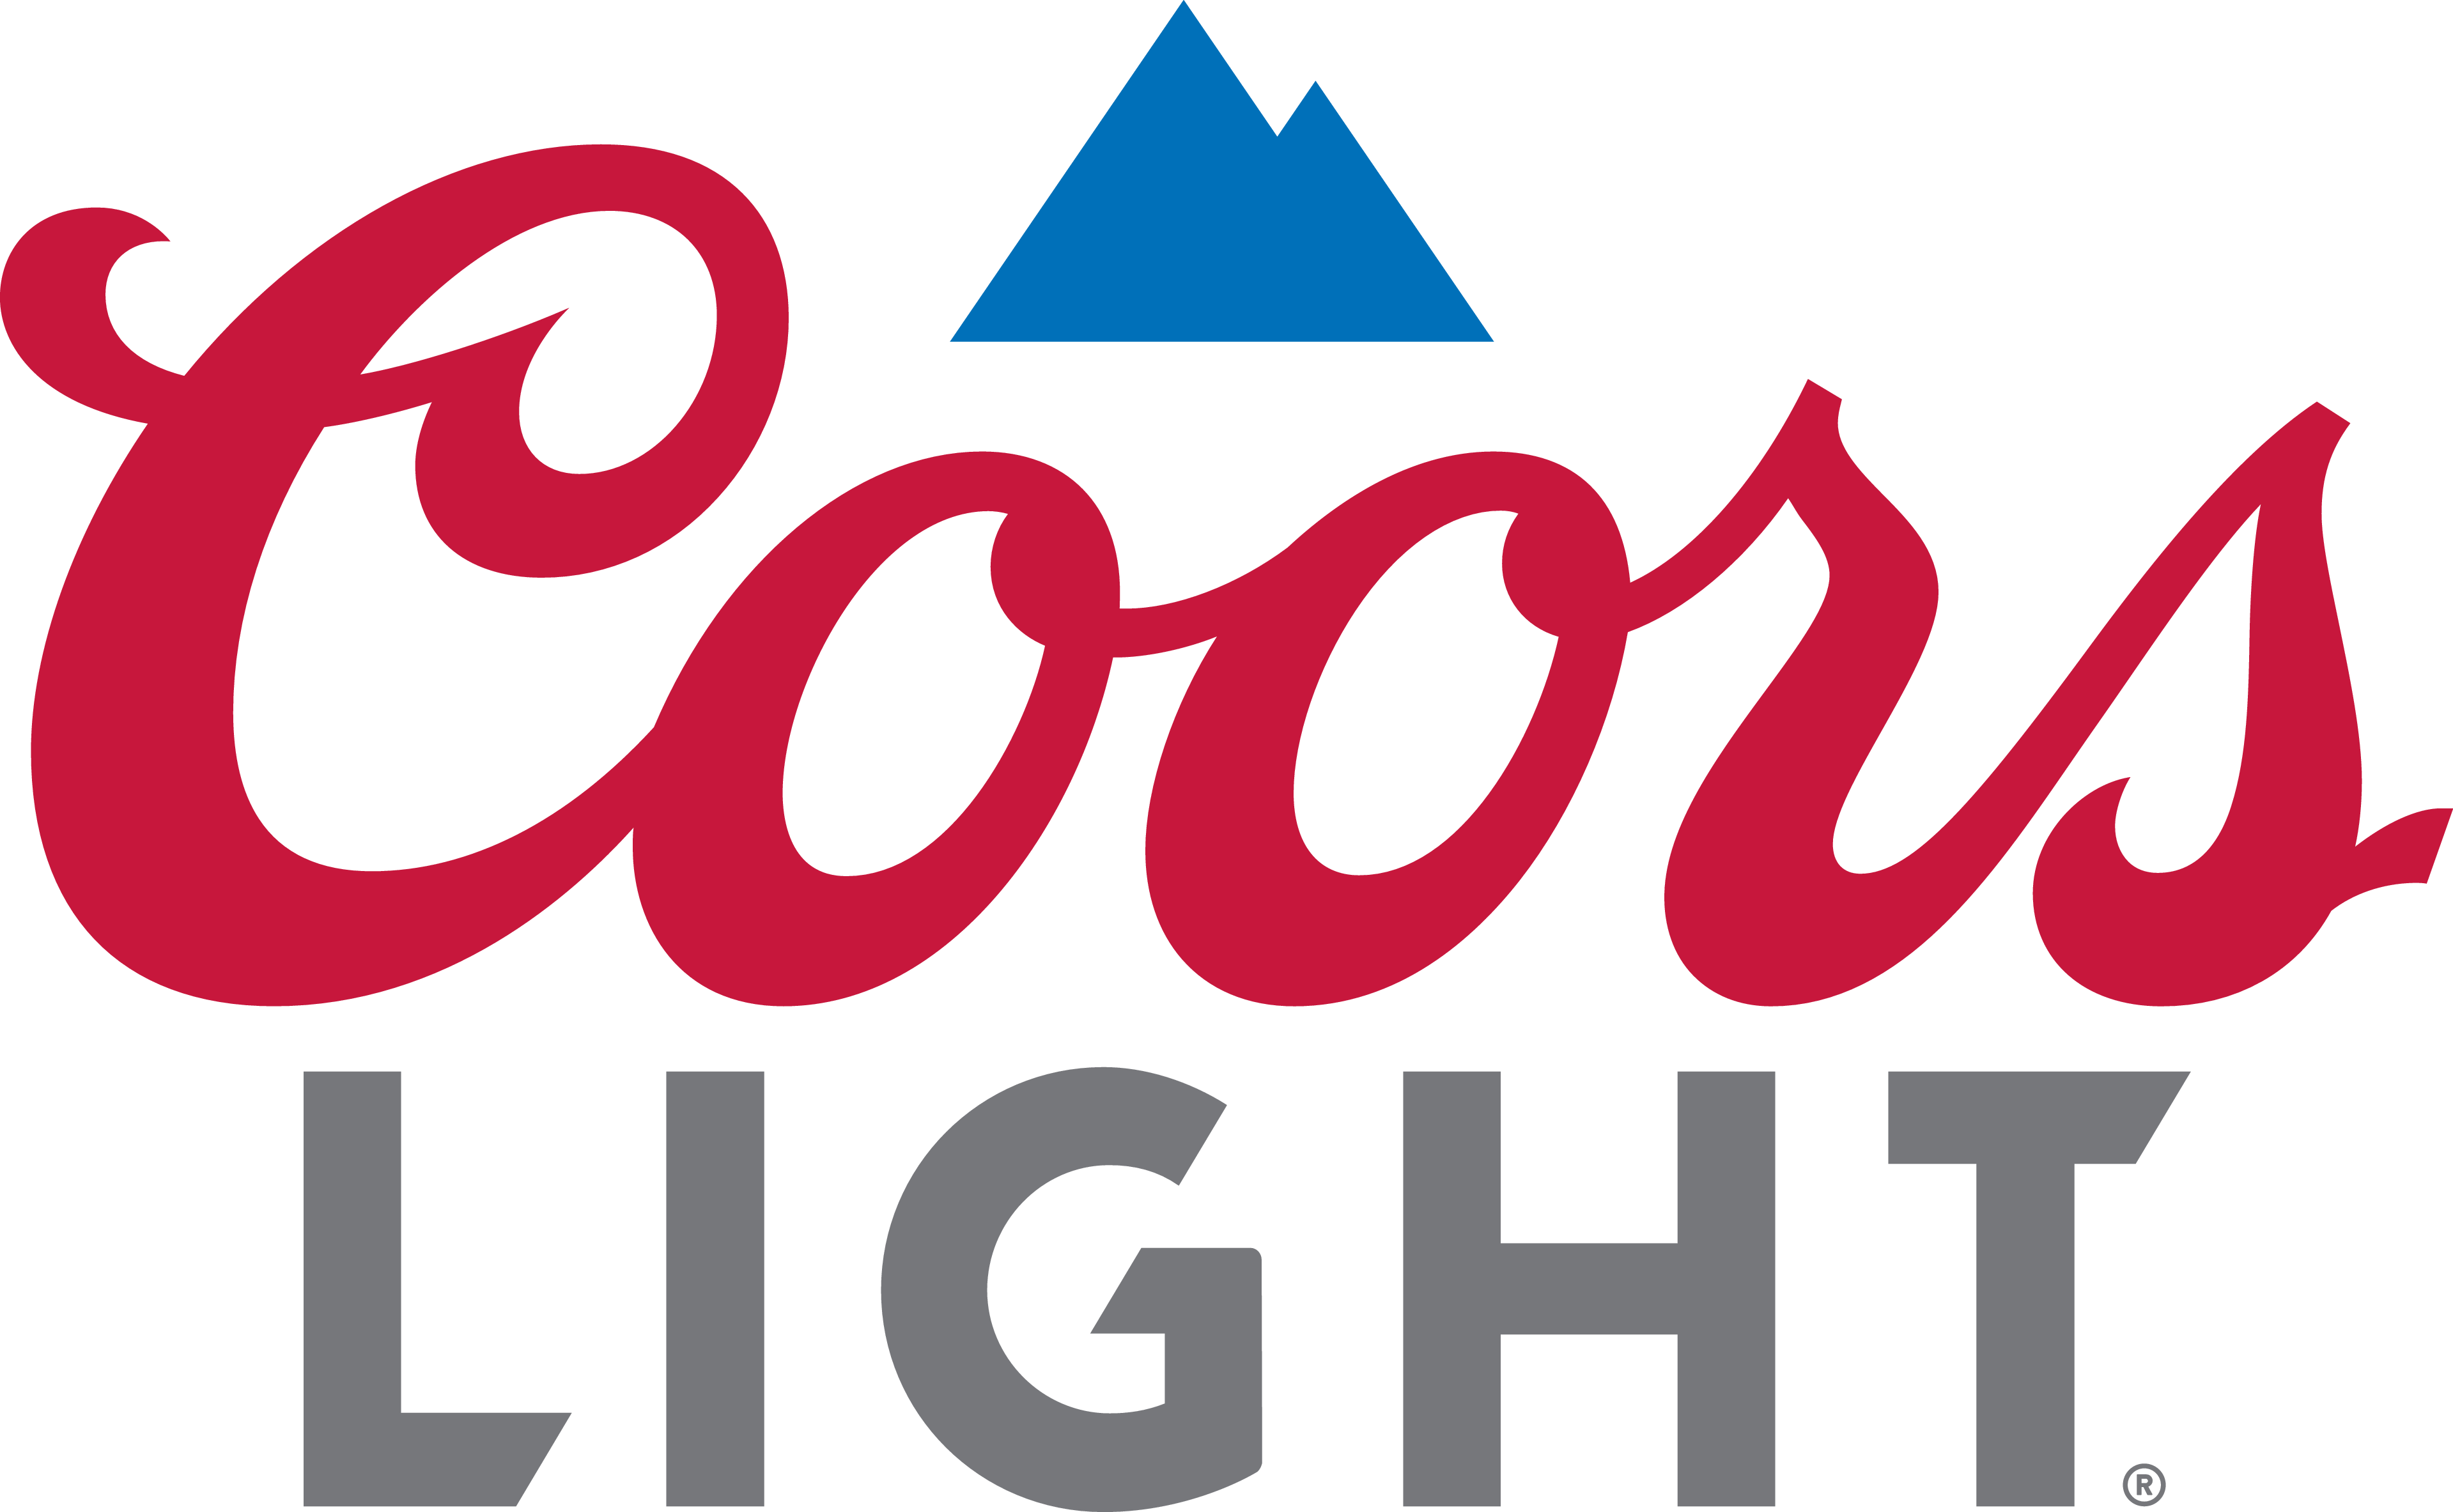 Coors Brewing Co